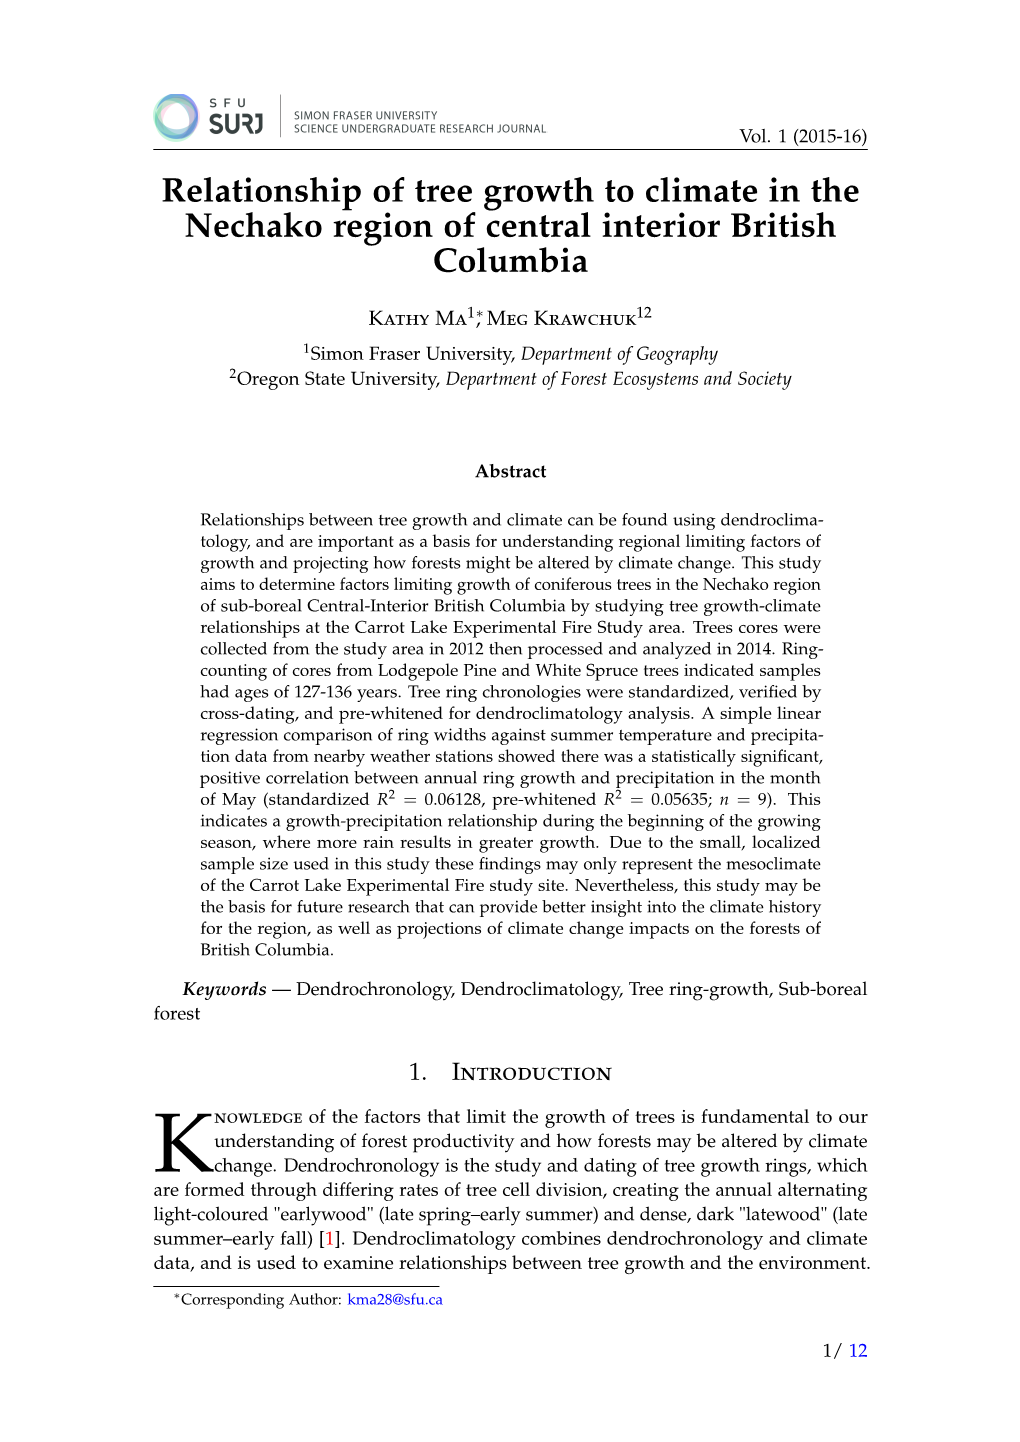 Relationship of Tree Growth to Climate in the Nechako Region of Central Interior British Columbia